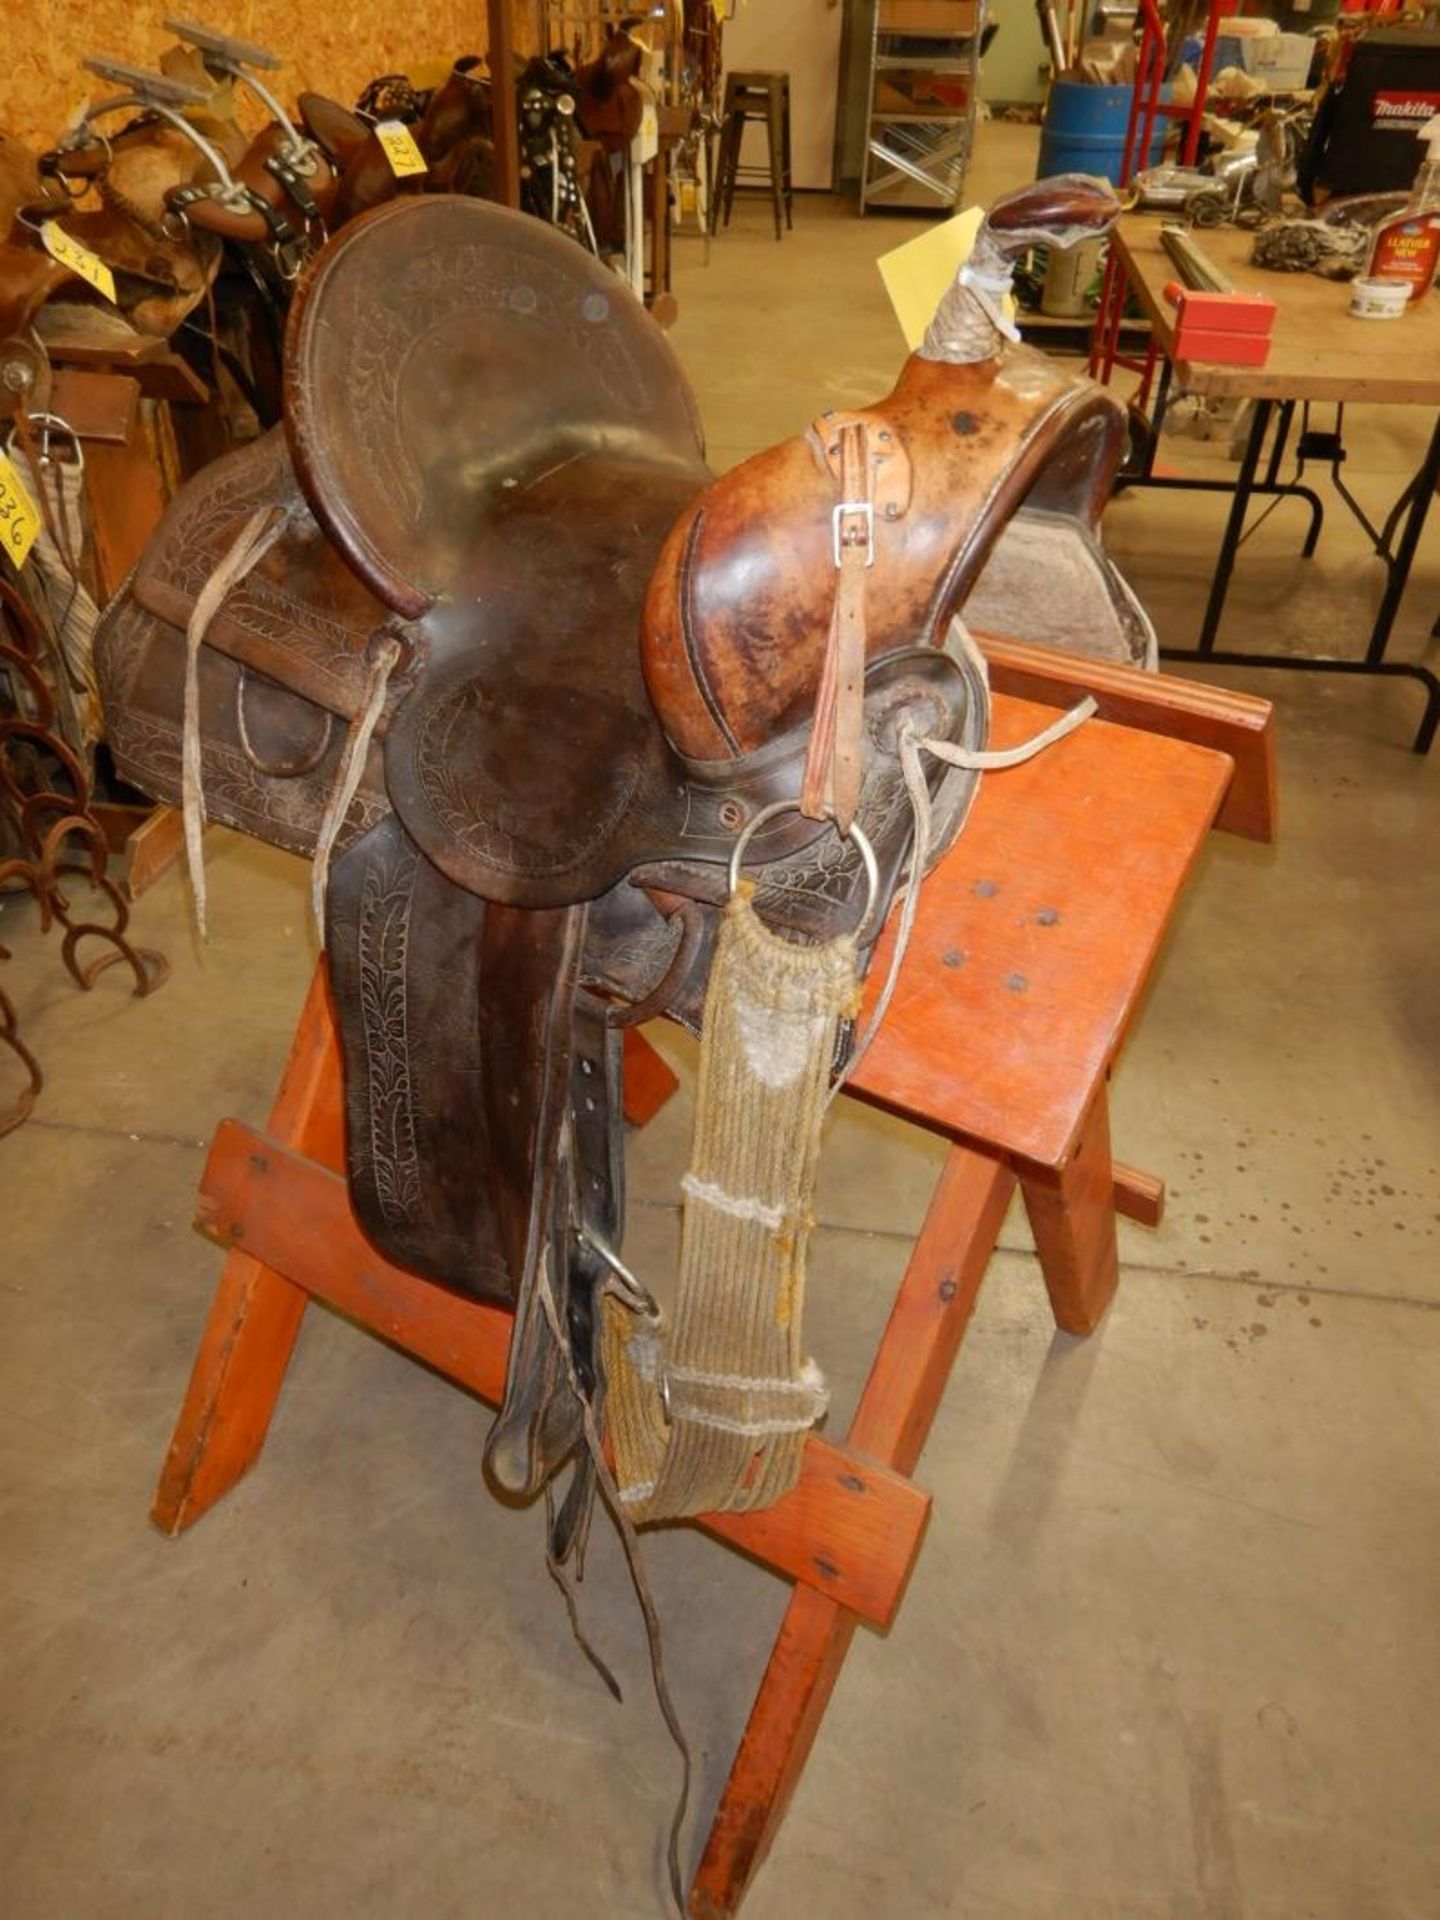 VINTAGE 14" WESTERN STOCK SADDLE, DBL RIG, RAWHIDE TREE, 15" FORKS, 6" CANTLE, RAWHIDE COVERED